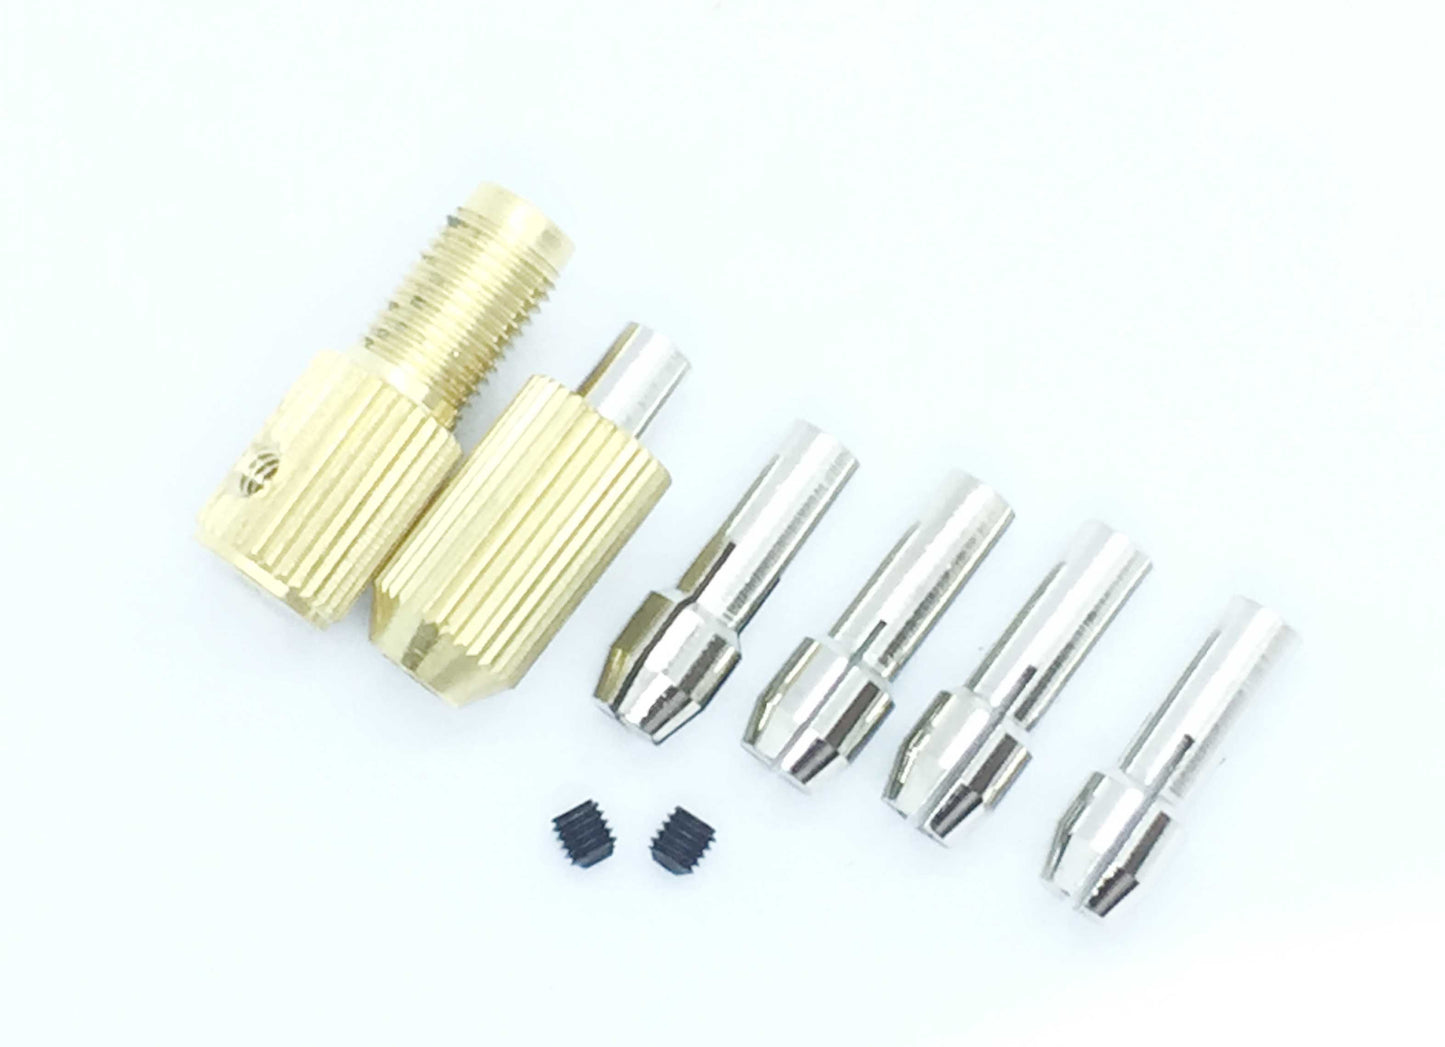 Shaft Drill Chuck Kit with 5 Copper Cores 2mm Aperture